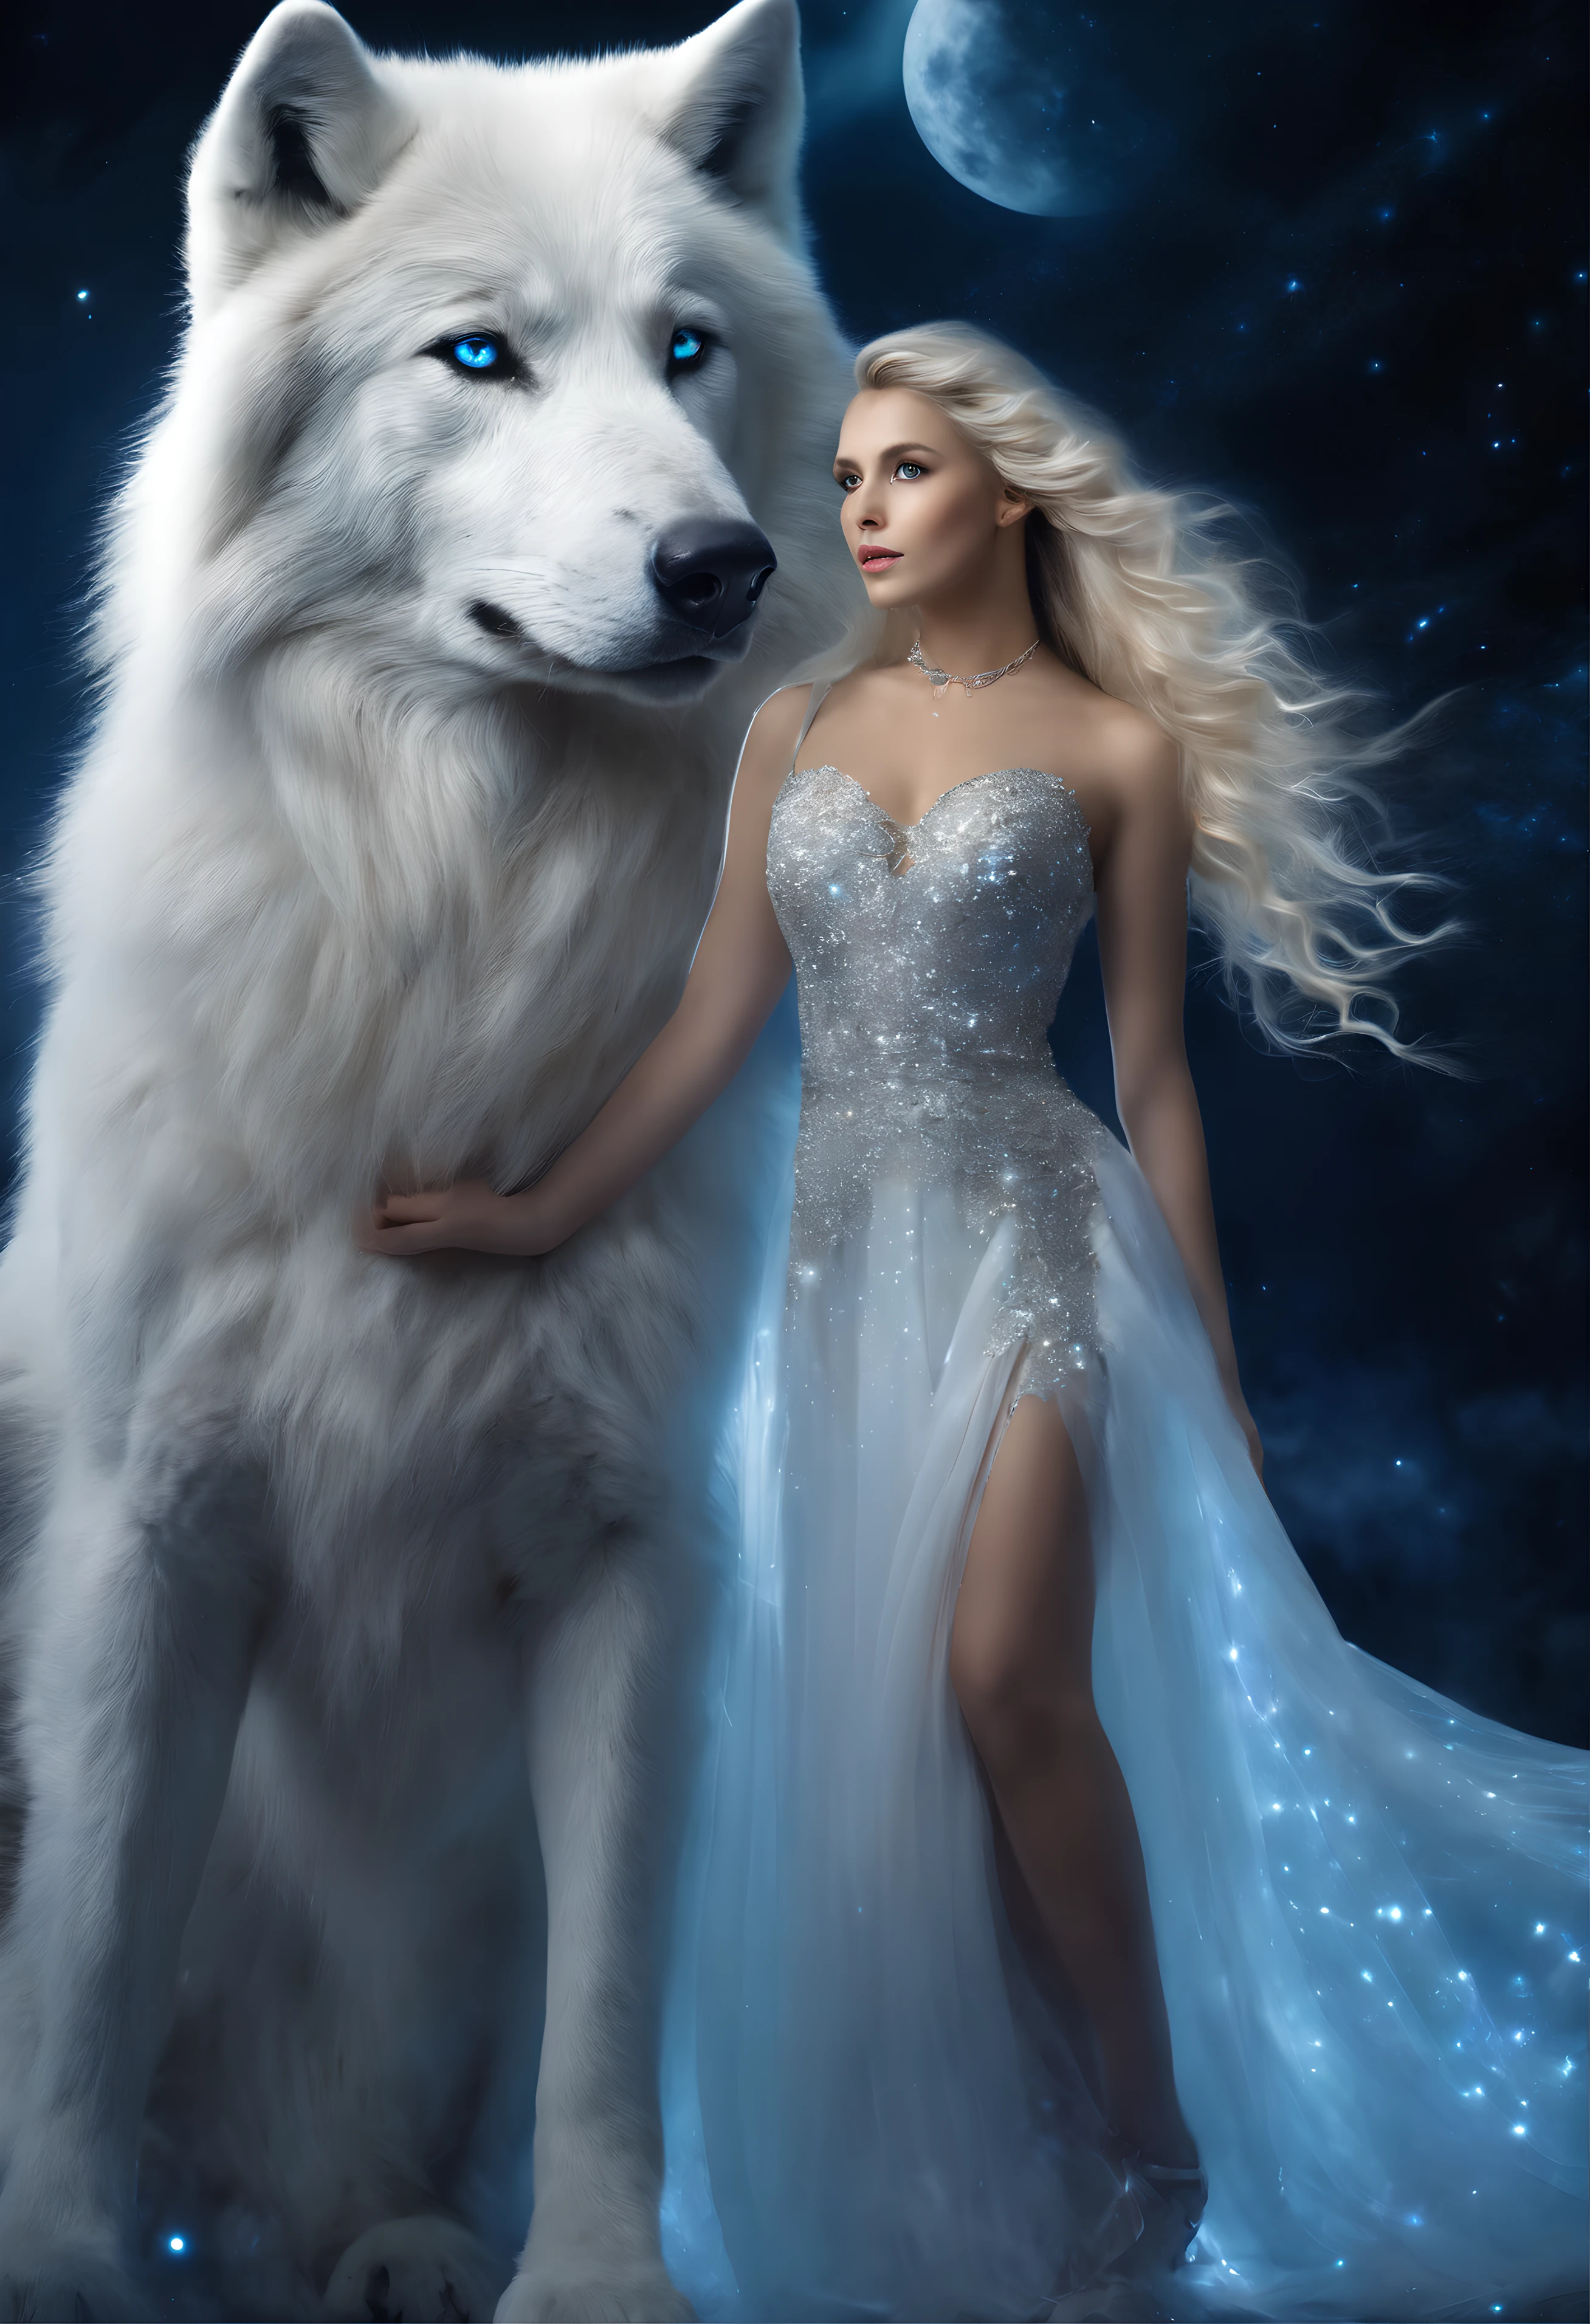 ((White wolf and girl)), (huge wolf), white wolf&#39;her fur glows with silver sparks, (a huge white wolf guards a beautiful young girl), motion, runs ahead, stooping forward, (Venus de Milo), (NSFW), a goddess, blue eyes, (A very young girl), ((Girl 16 years old)) lips ajar, blue eyes, blonde woman, Very long curly hair, transparent board, transparent air payment, Silver collar, Silver Belt, greek sandals, Silver sandals, Starry sky background, A lot of stars, background Orion Nebula, Two moons, Orion Nebula, go on star trek, The Milky Way is at your feet. full body photographed, Panoramic view, (Masterpiece: 1.5) (Photorealistic: 1.1) (Best Quality) (detail skin texture, pores, hairsh: 1.1) (Intricate) (8K) (HDR) (wallpapers) (Cinematic lighting) (sharp-focus)